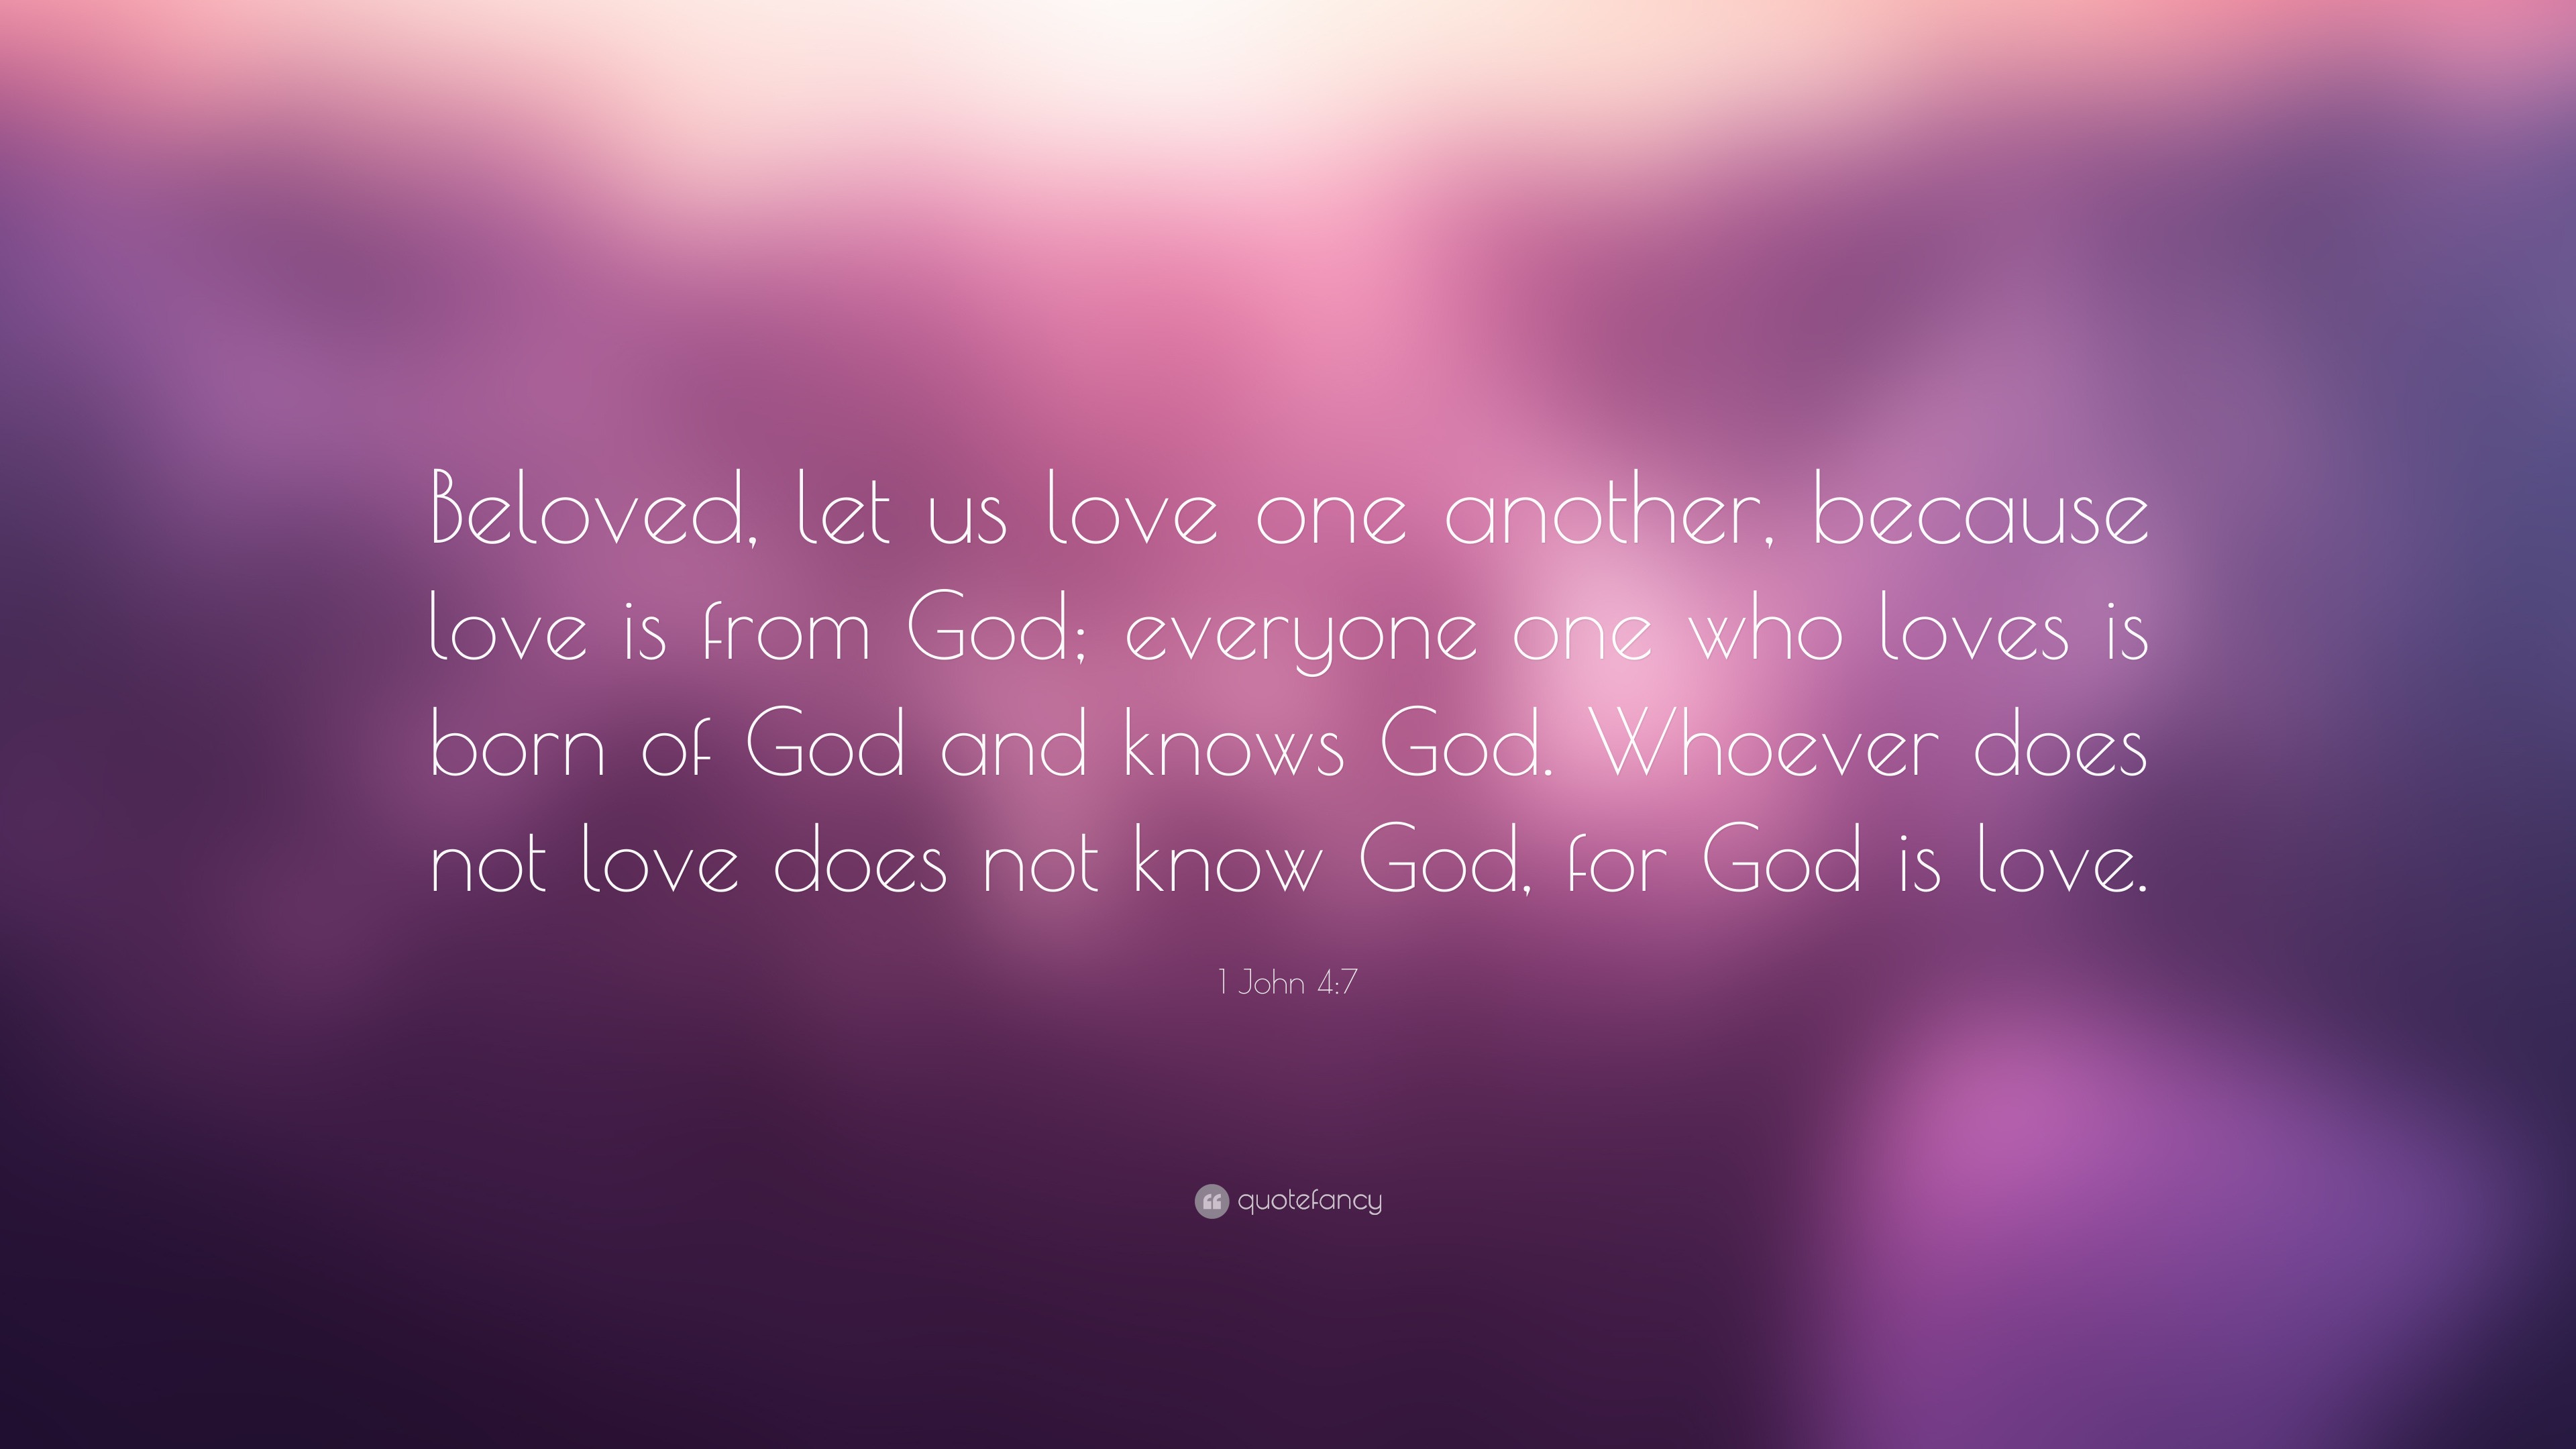 1 John 4:7 Quote: “Beloved, let us love one another, because love is